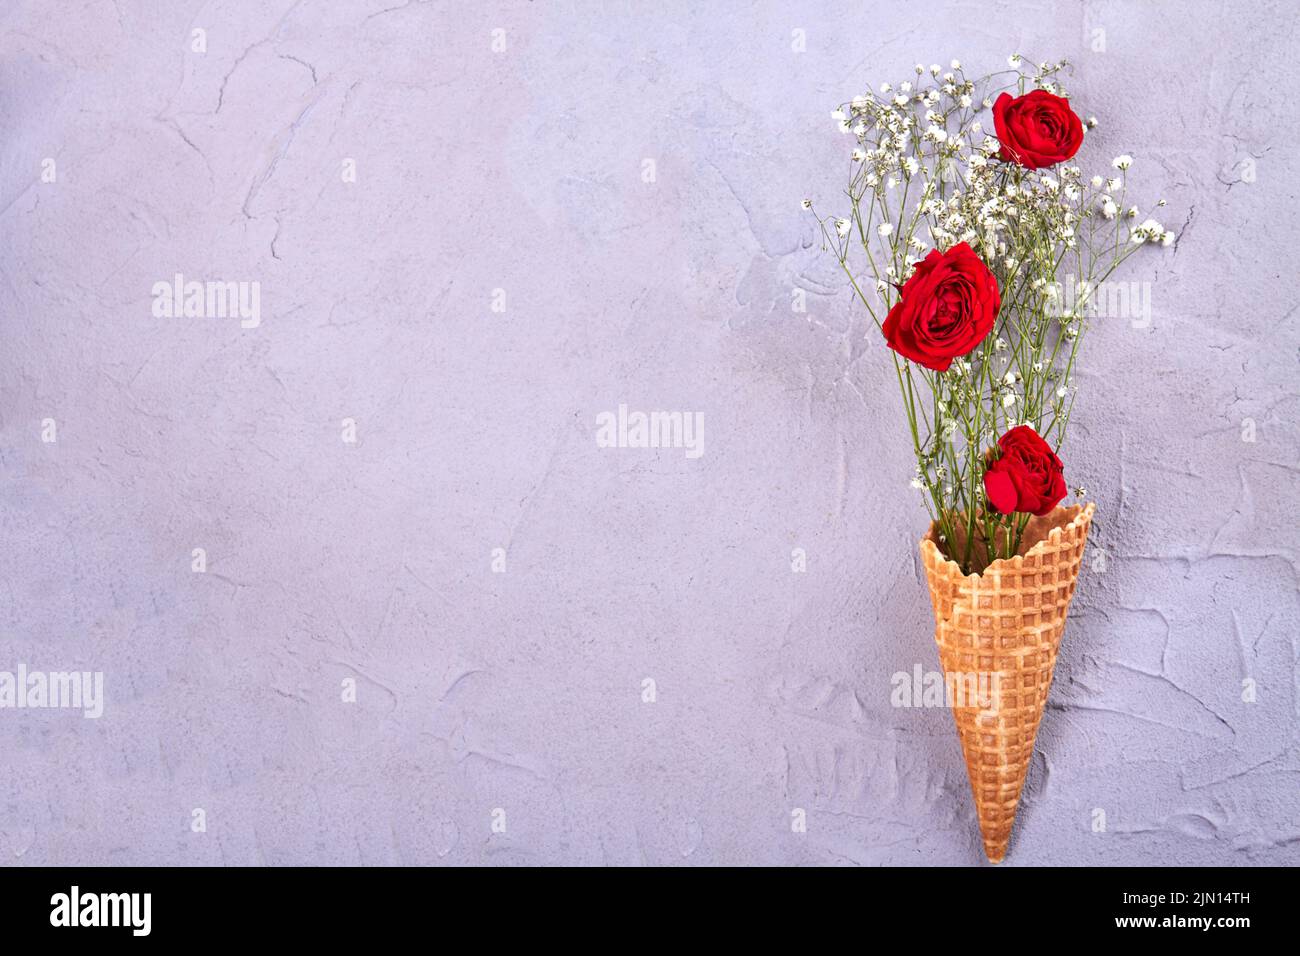 Waffle ice cream cone with flowers and copy space. Red roses and tiny white flowers. Stock Photo